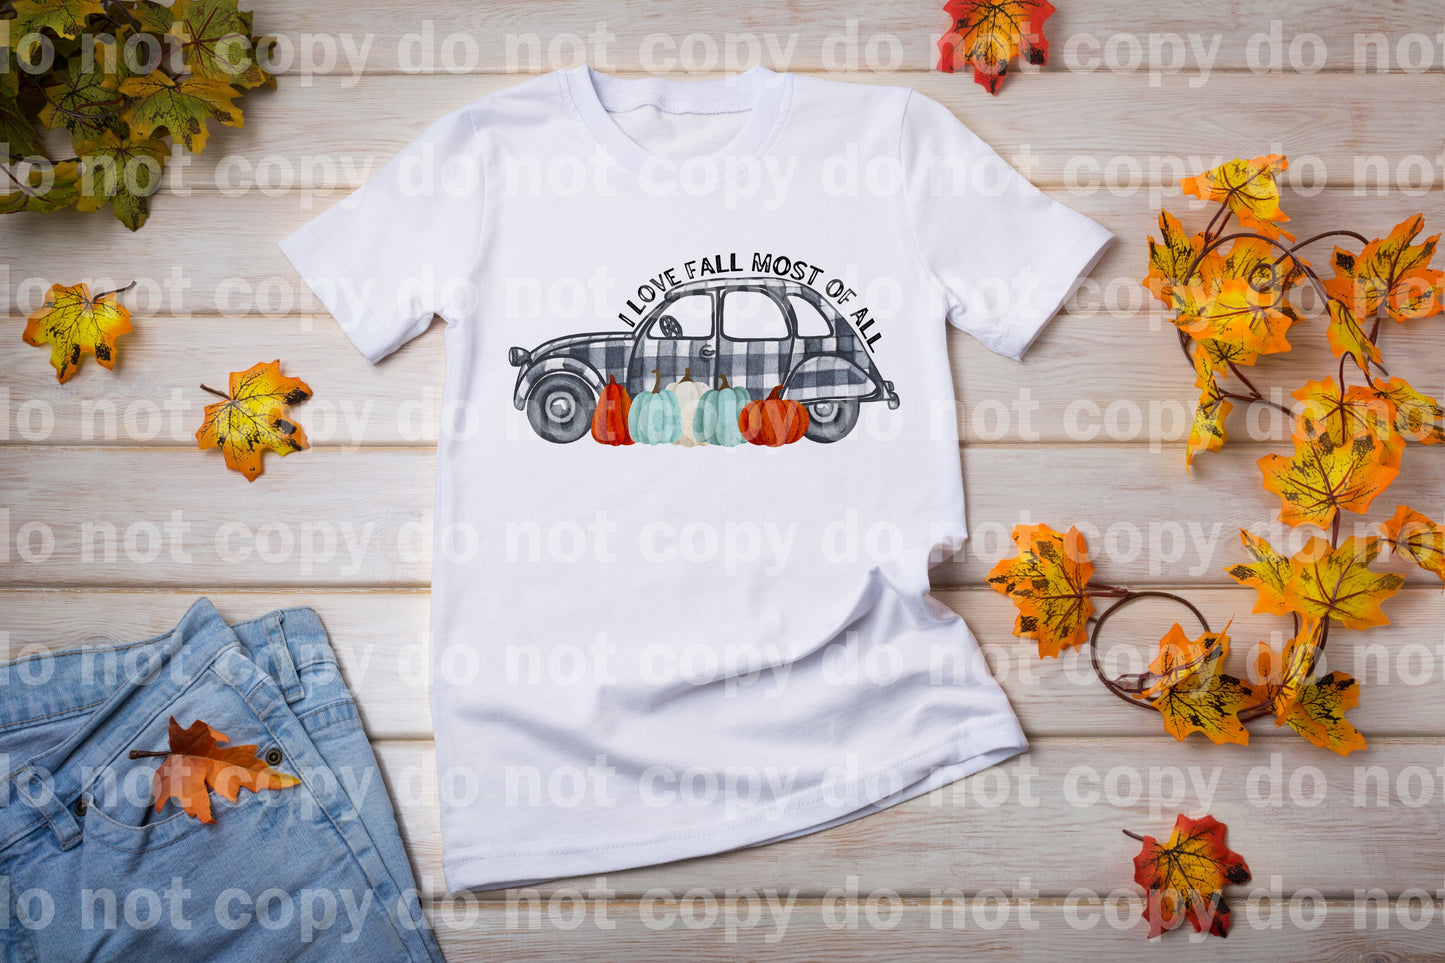 I Love Fall Most of All Plaid Car and Pumpkins Dream Print or Sublimation Print